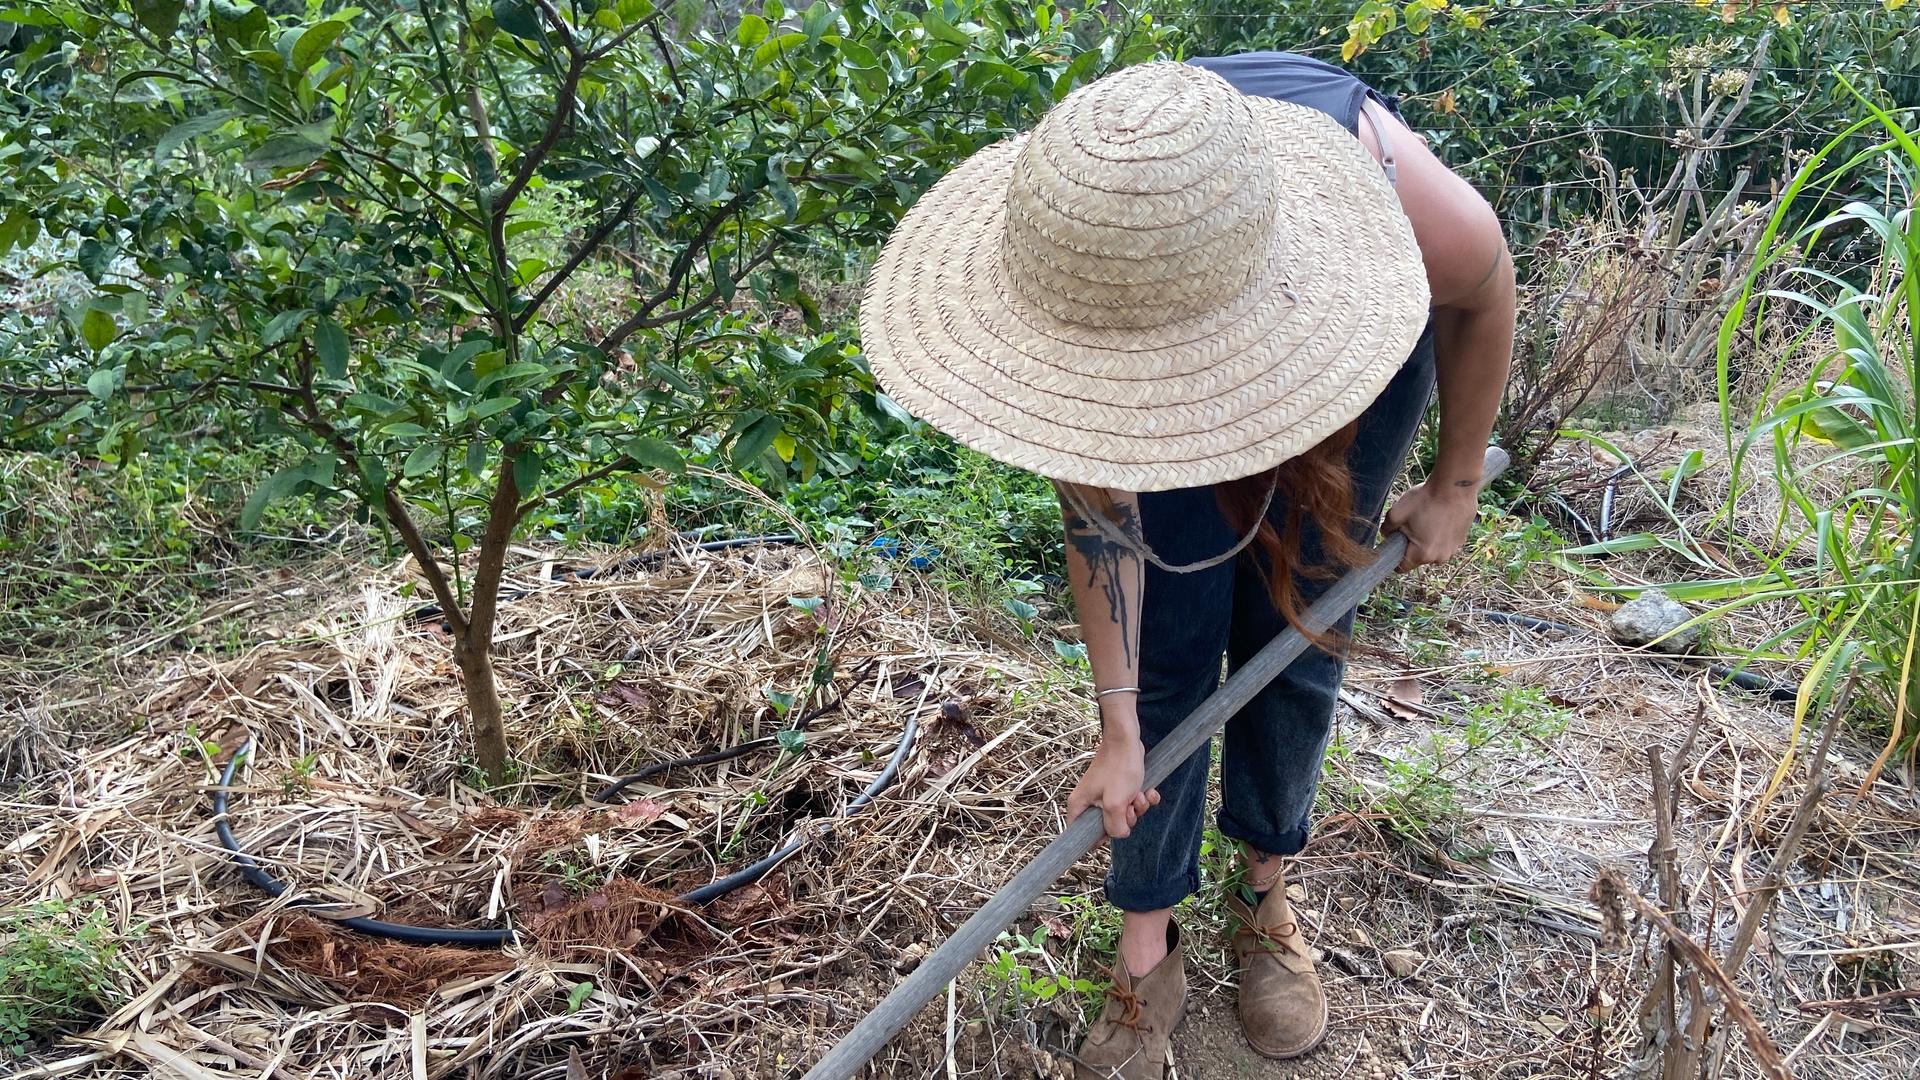 La Gomera farmer Iru Izquierdo tends to her avocado trees. She wishes the government would support local food production the same way it promotes its tourist attractions.